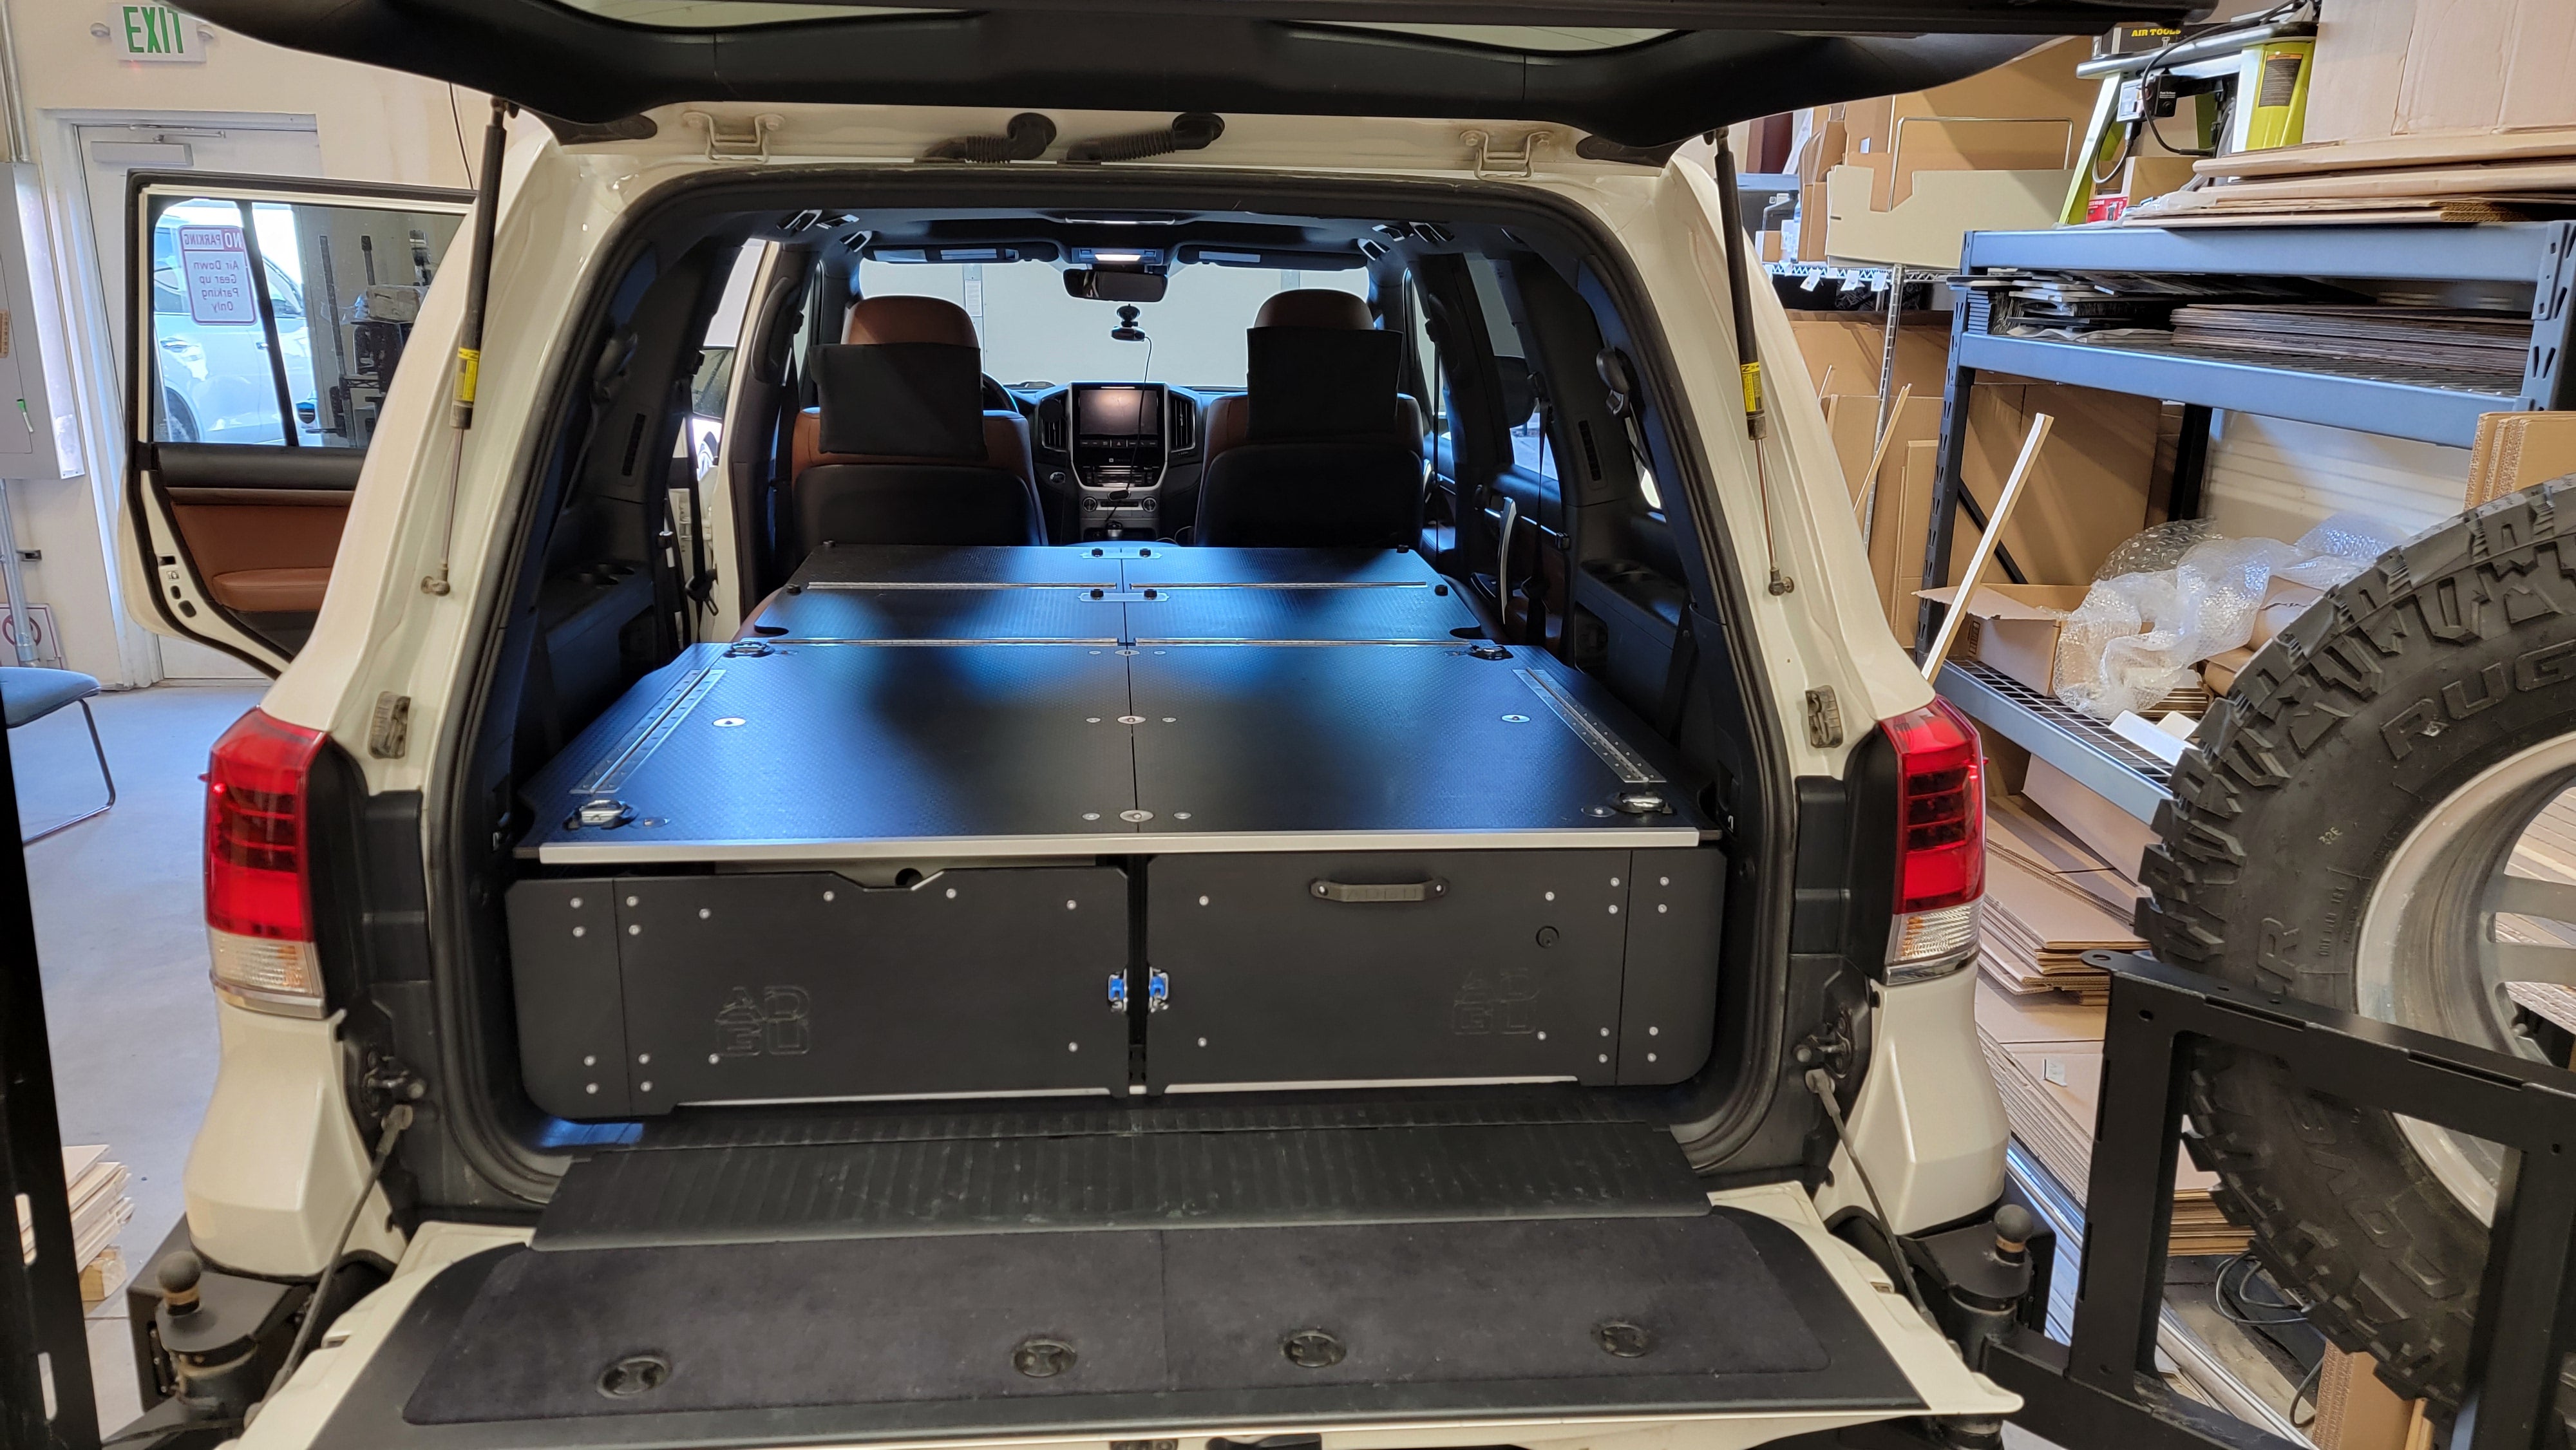 200 Series Toyota Land Cruiser LX570 drawer system with sleeping platform for vehicle organization perfect for overland travel.